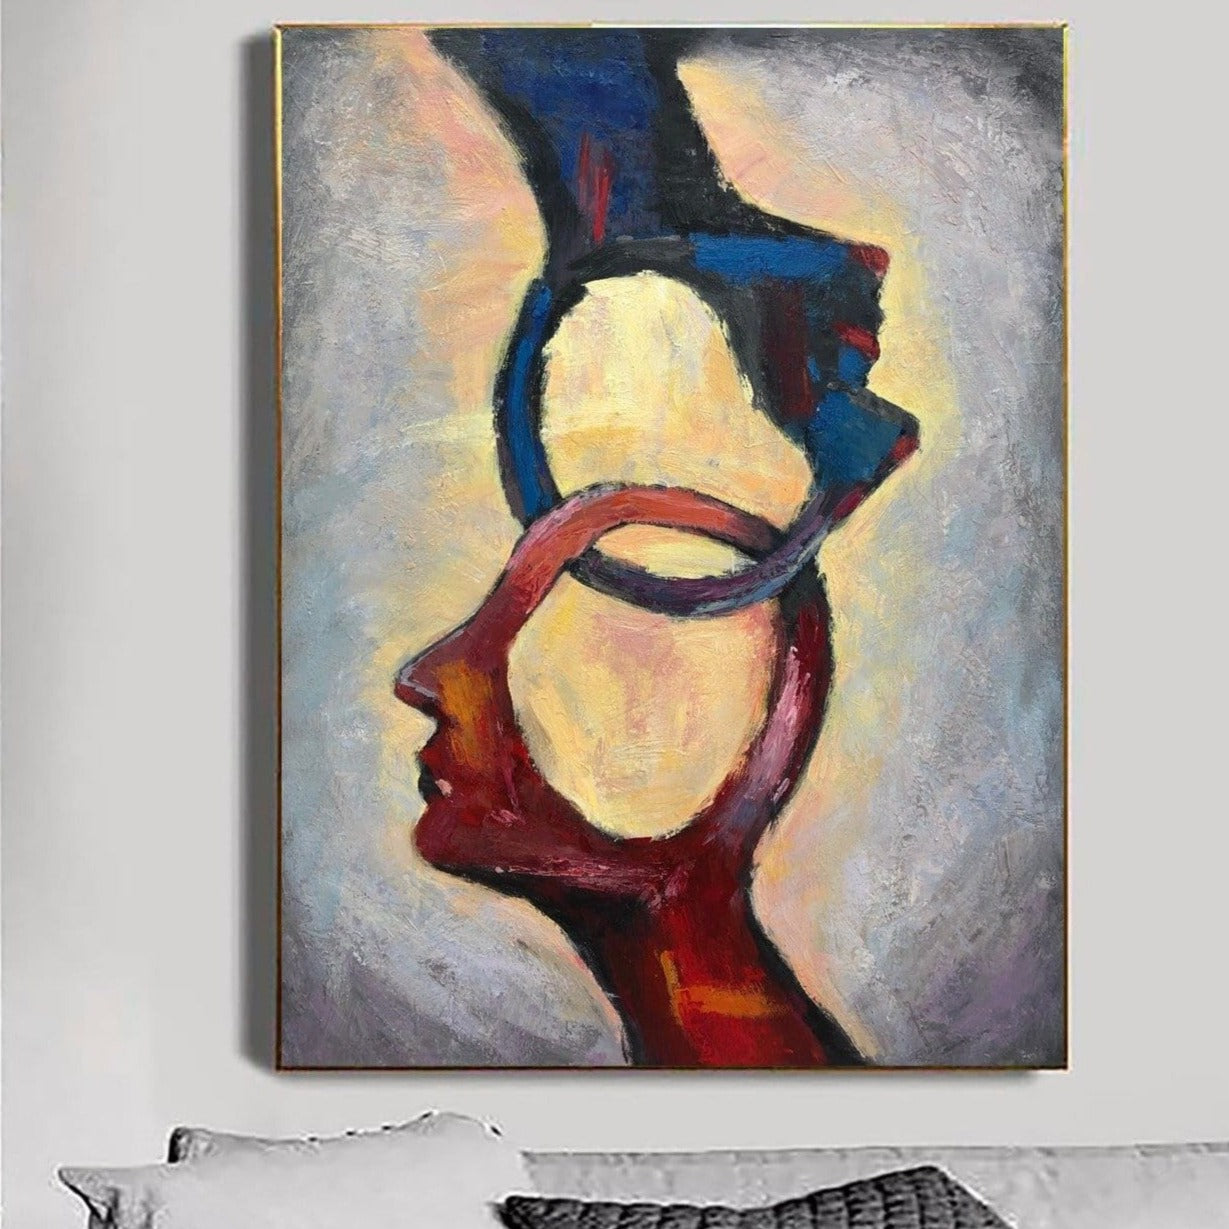 Human Abstract Painting Large Abstract Acrylic Painting On Canvas Figu